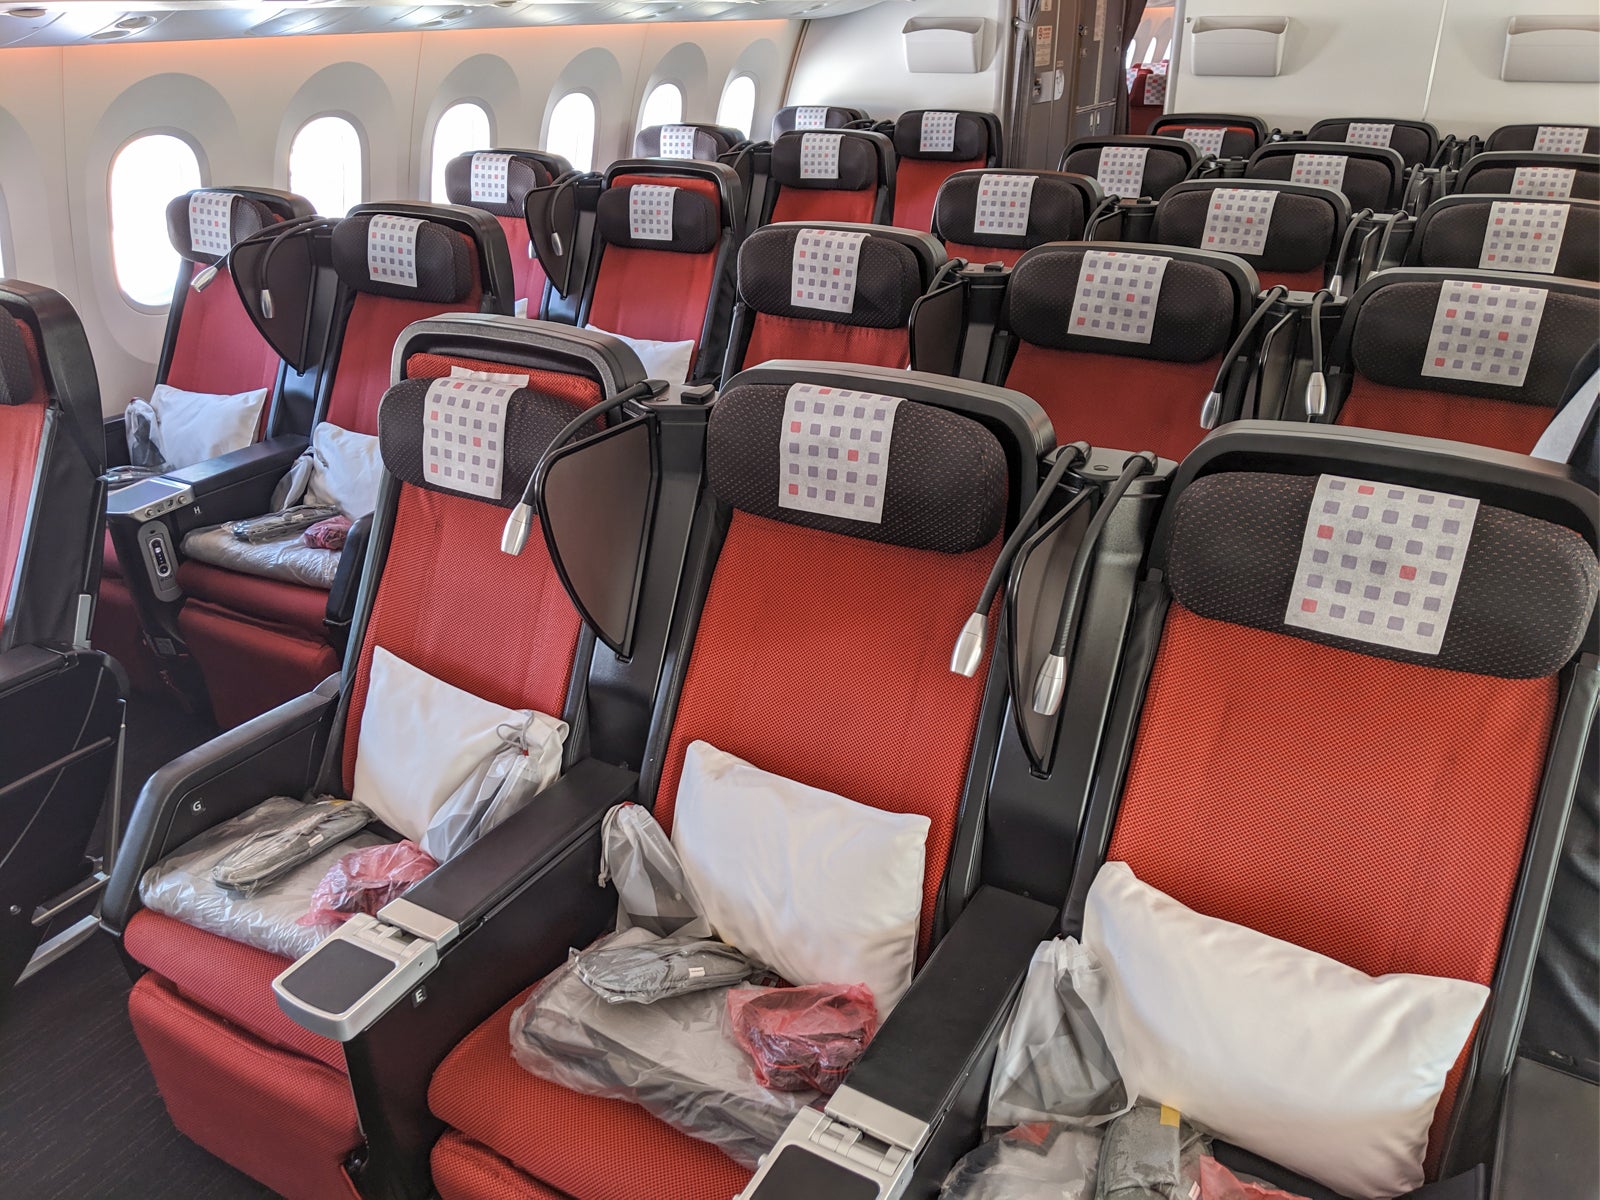 So close to greatness: A review of Japan Airlines in a Boeing 787